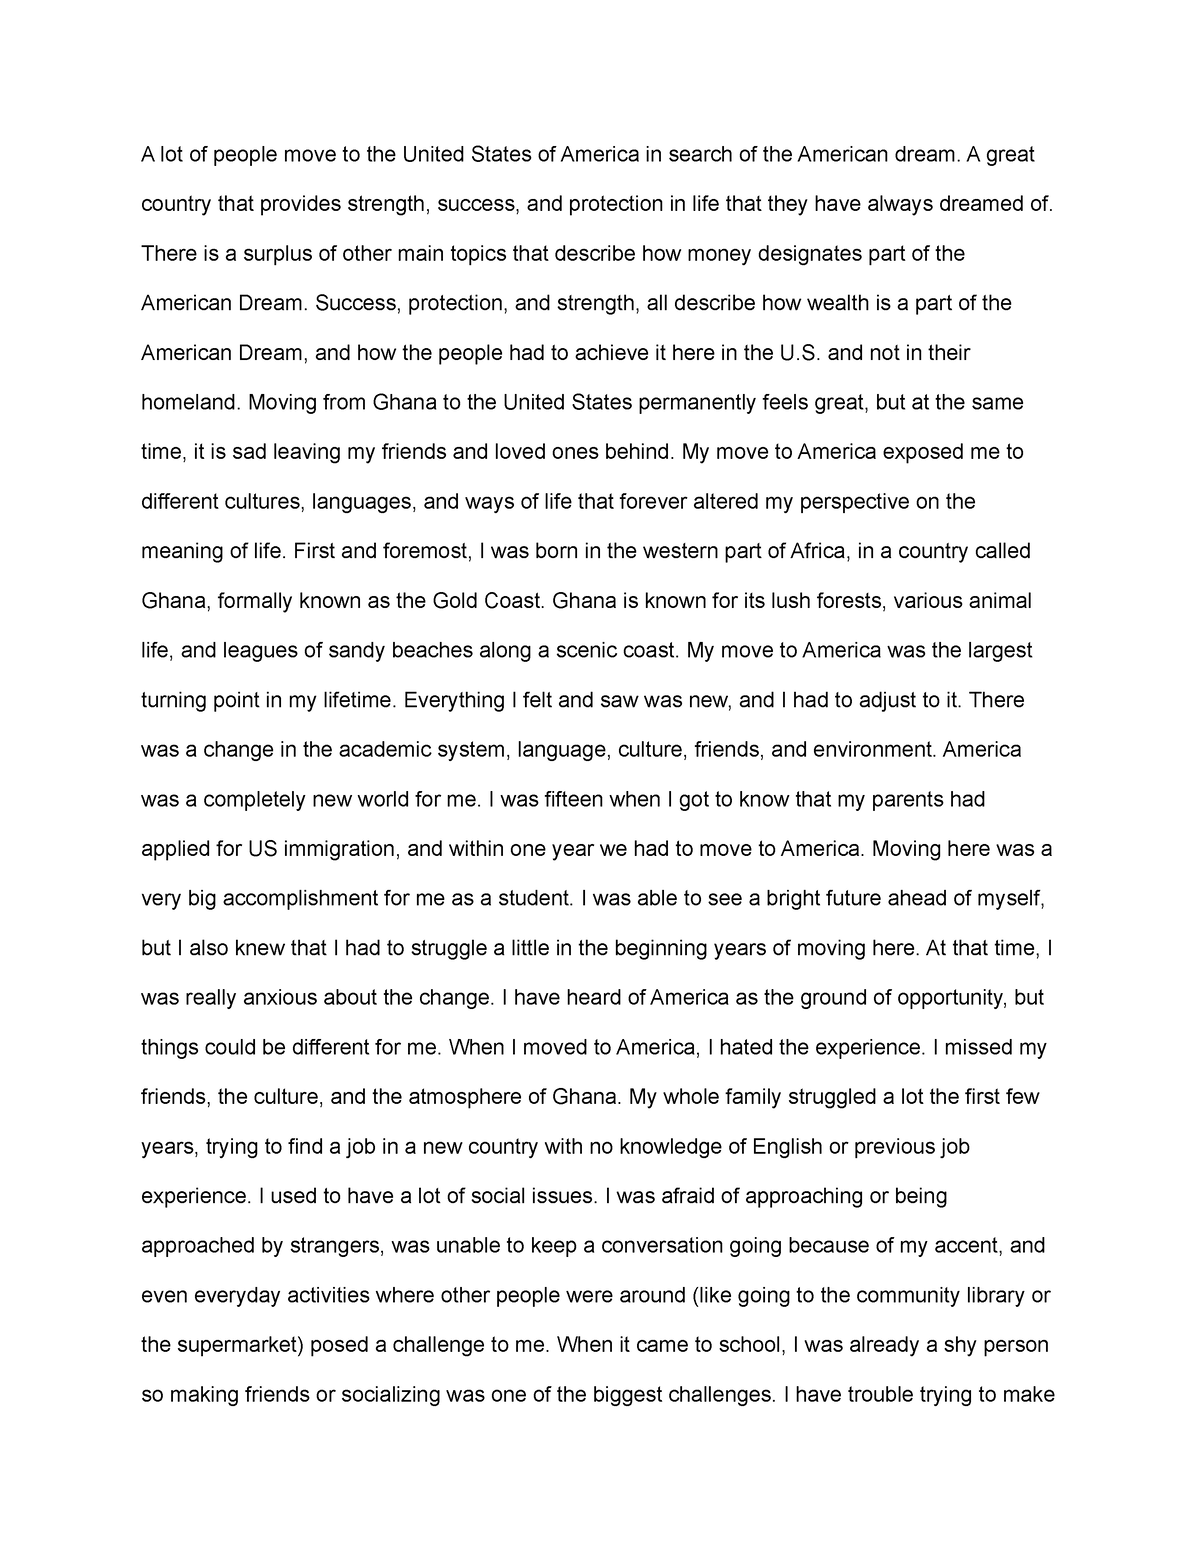 college essay about moving to another country